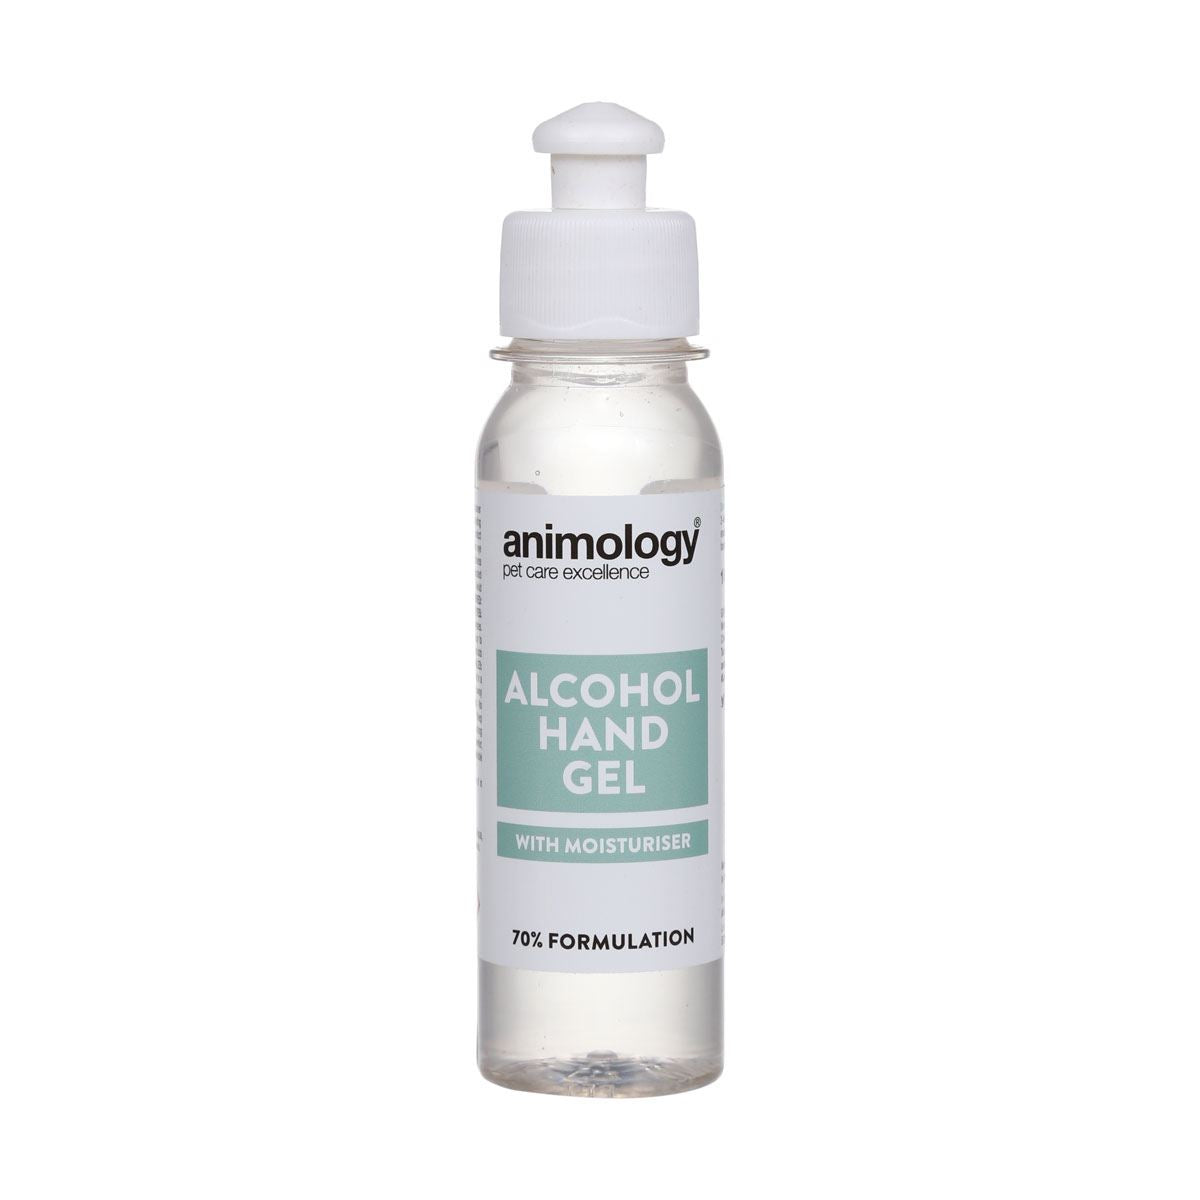 Animology Alcohol Hand Gel - Just Horse Riders